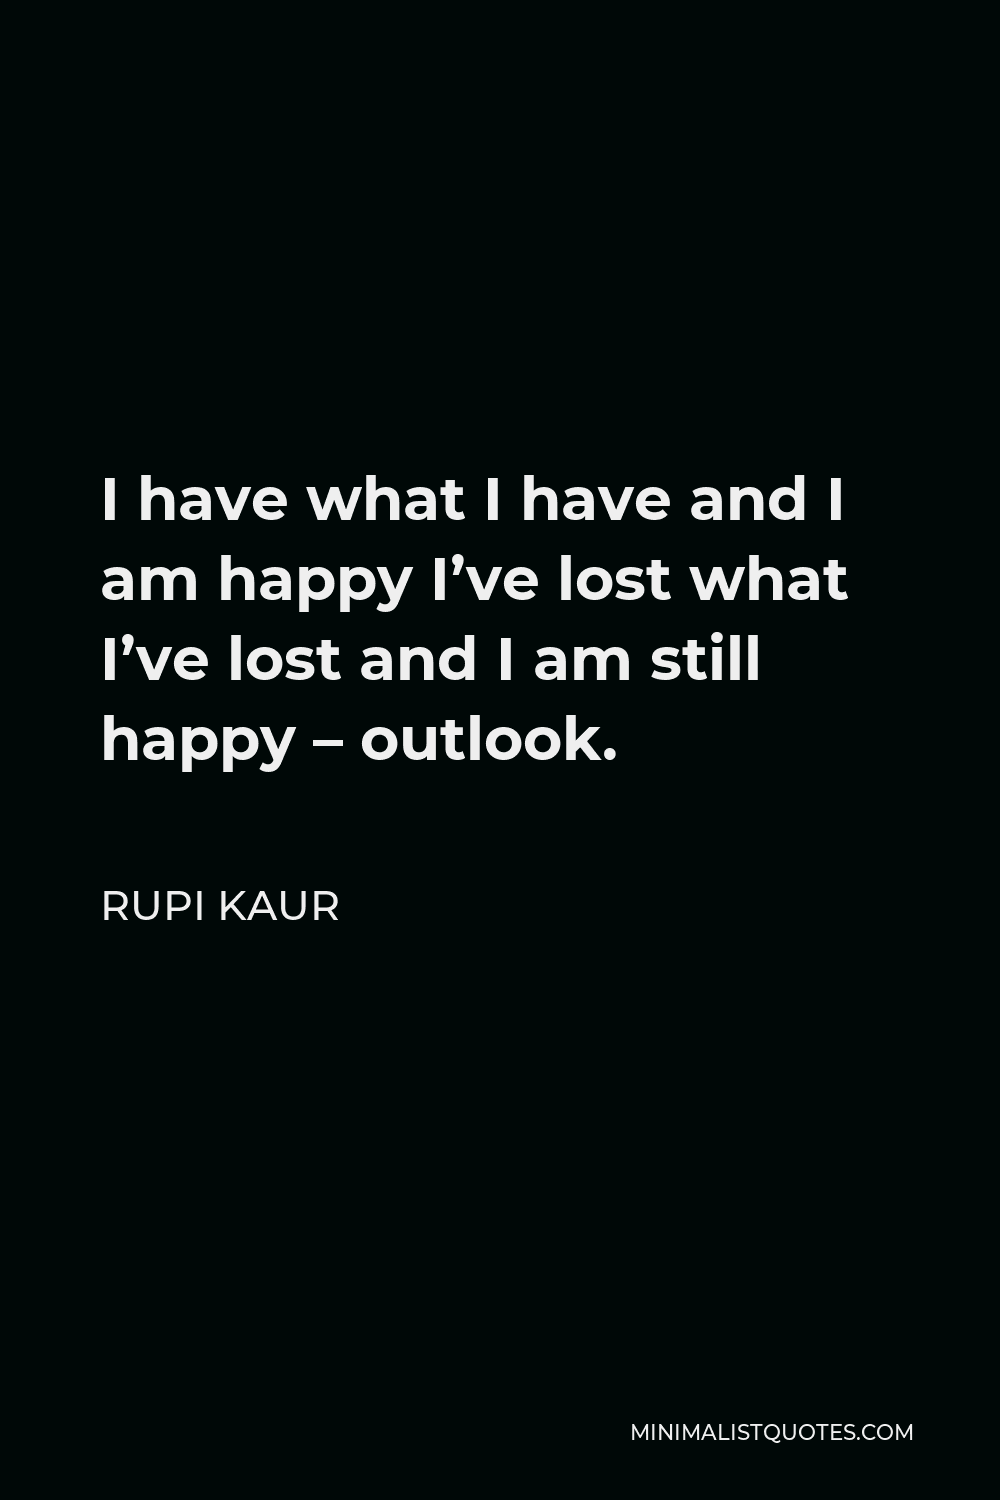 Rupi Kaur Quote - I have what I have and I am happy I’ve lost what I’ve lost and I am still happy – outlook.